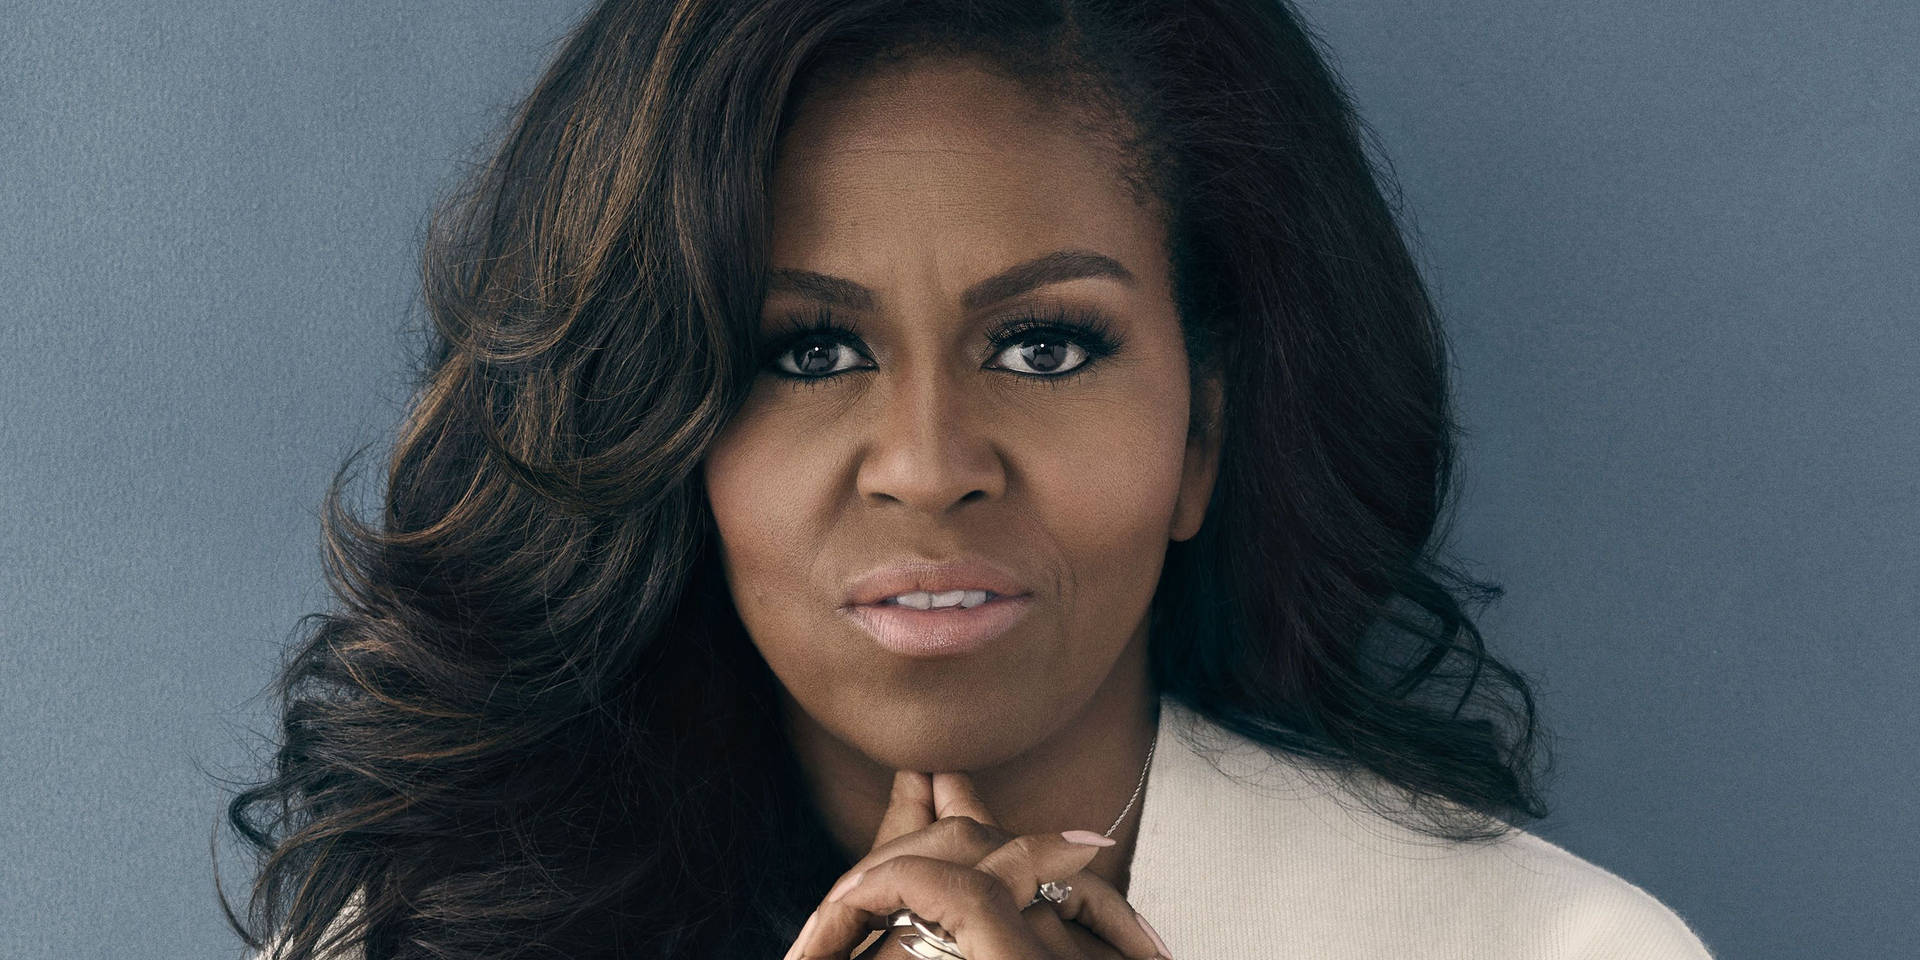 Michelle Obama Wallpaper Images